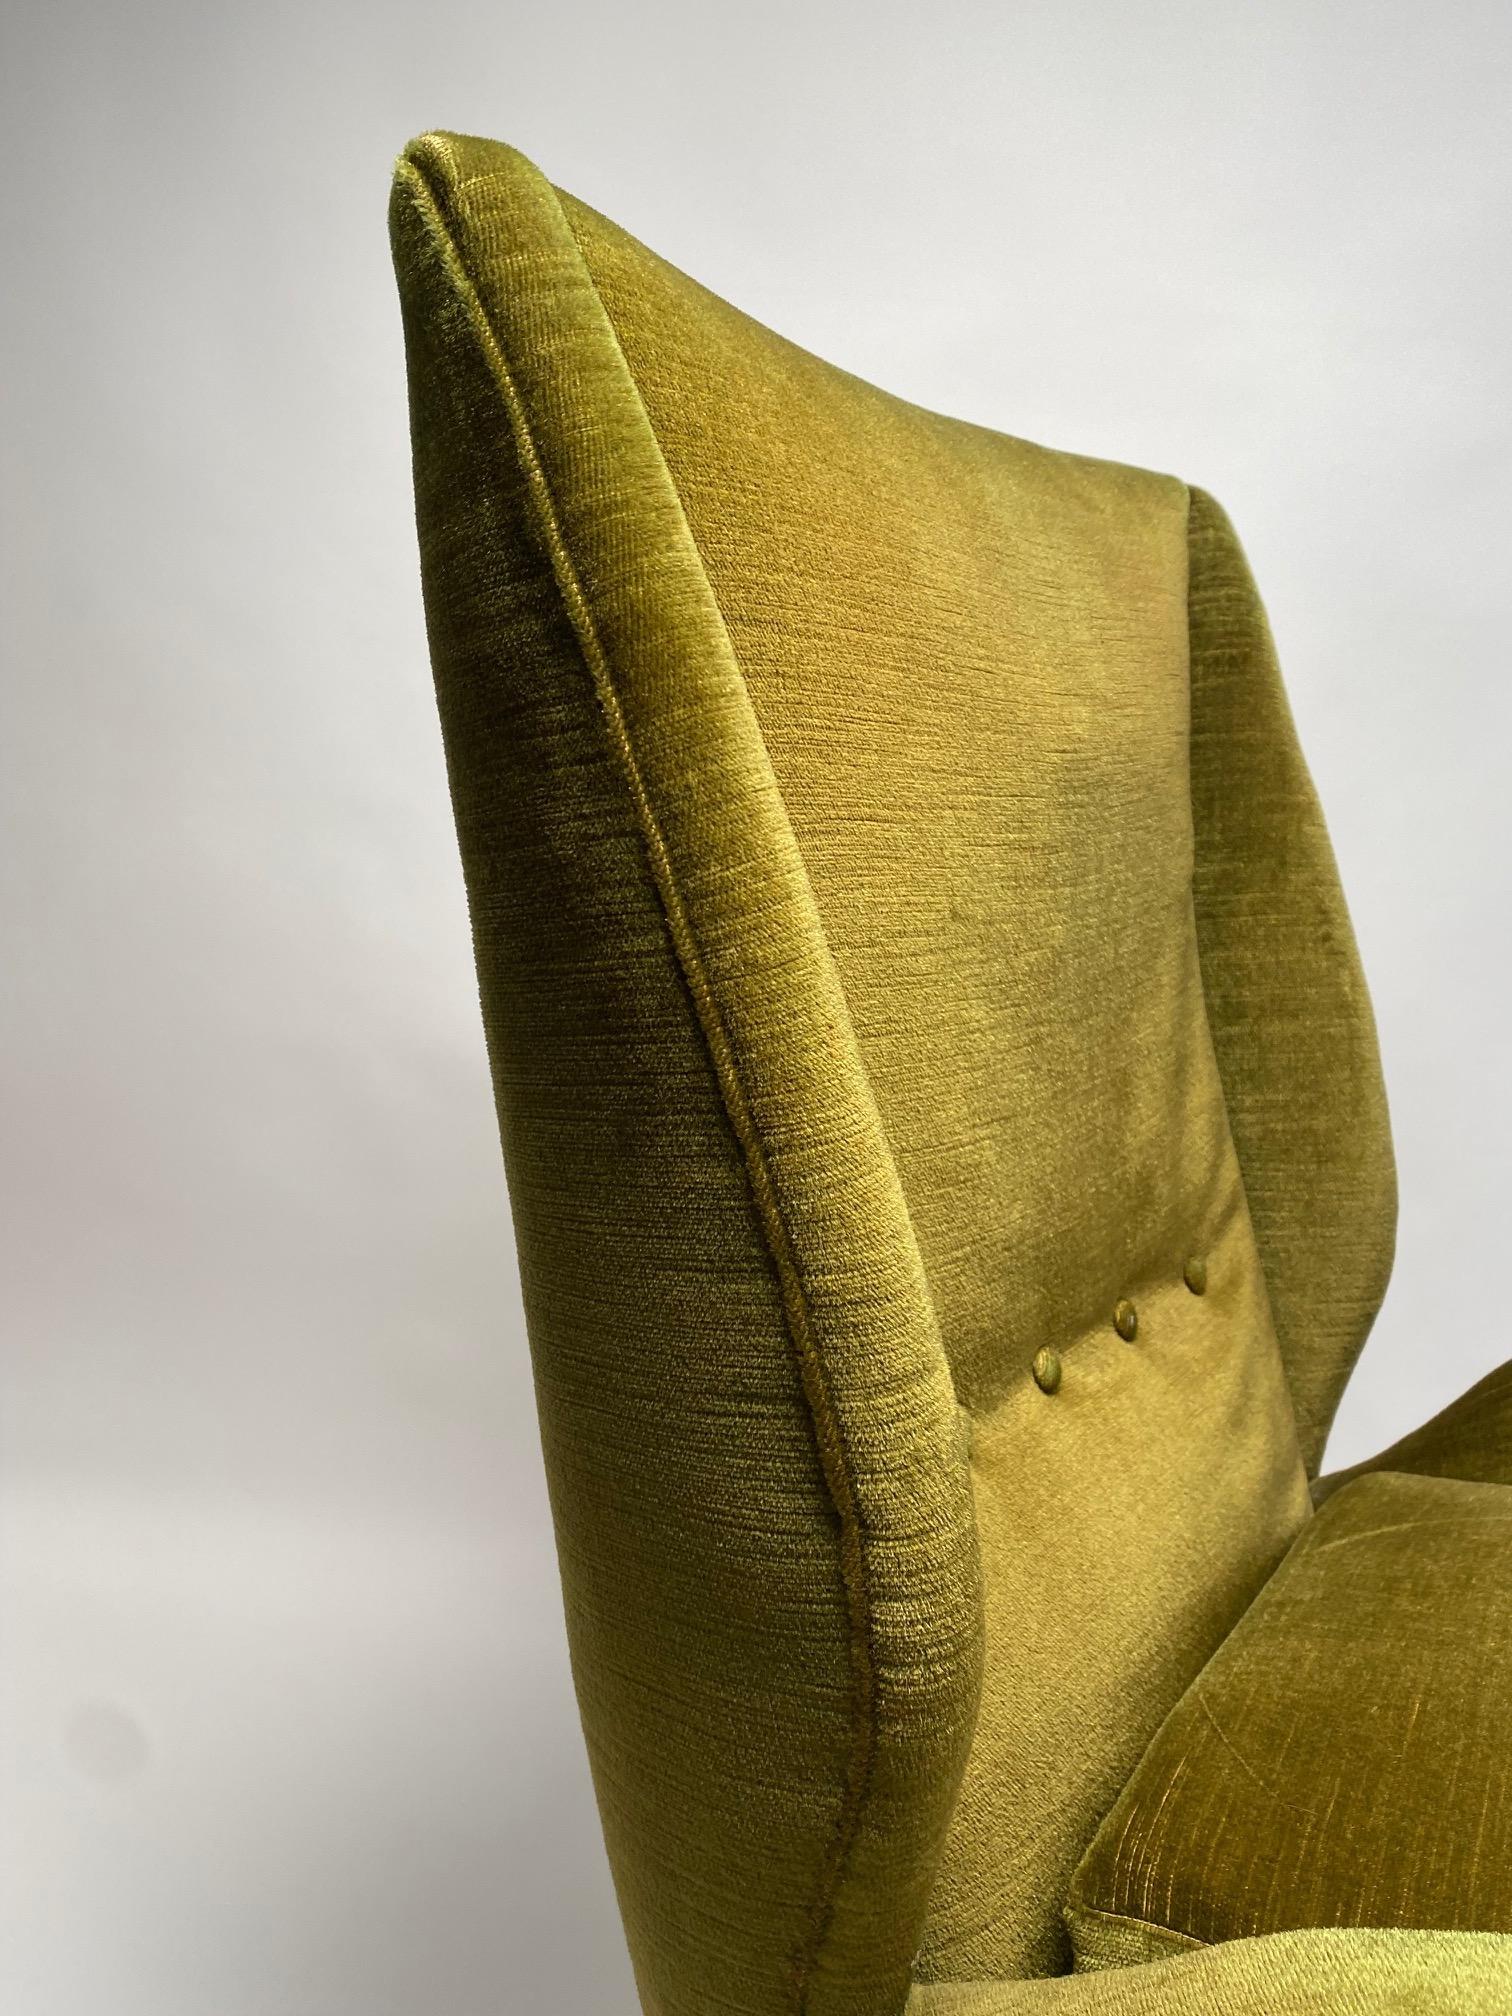 Italian Gio Ponti, rare pair of Wingback Armchairs for ISA, Italy, 1950s (customizable) For Sale